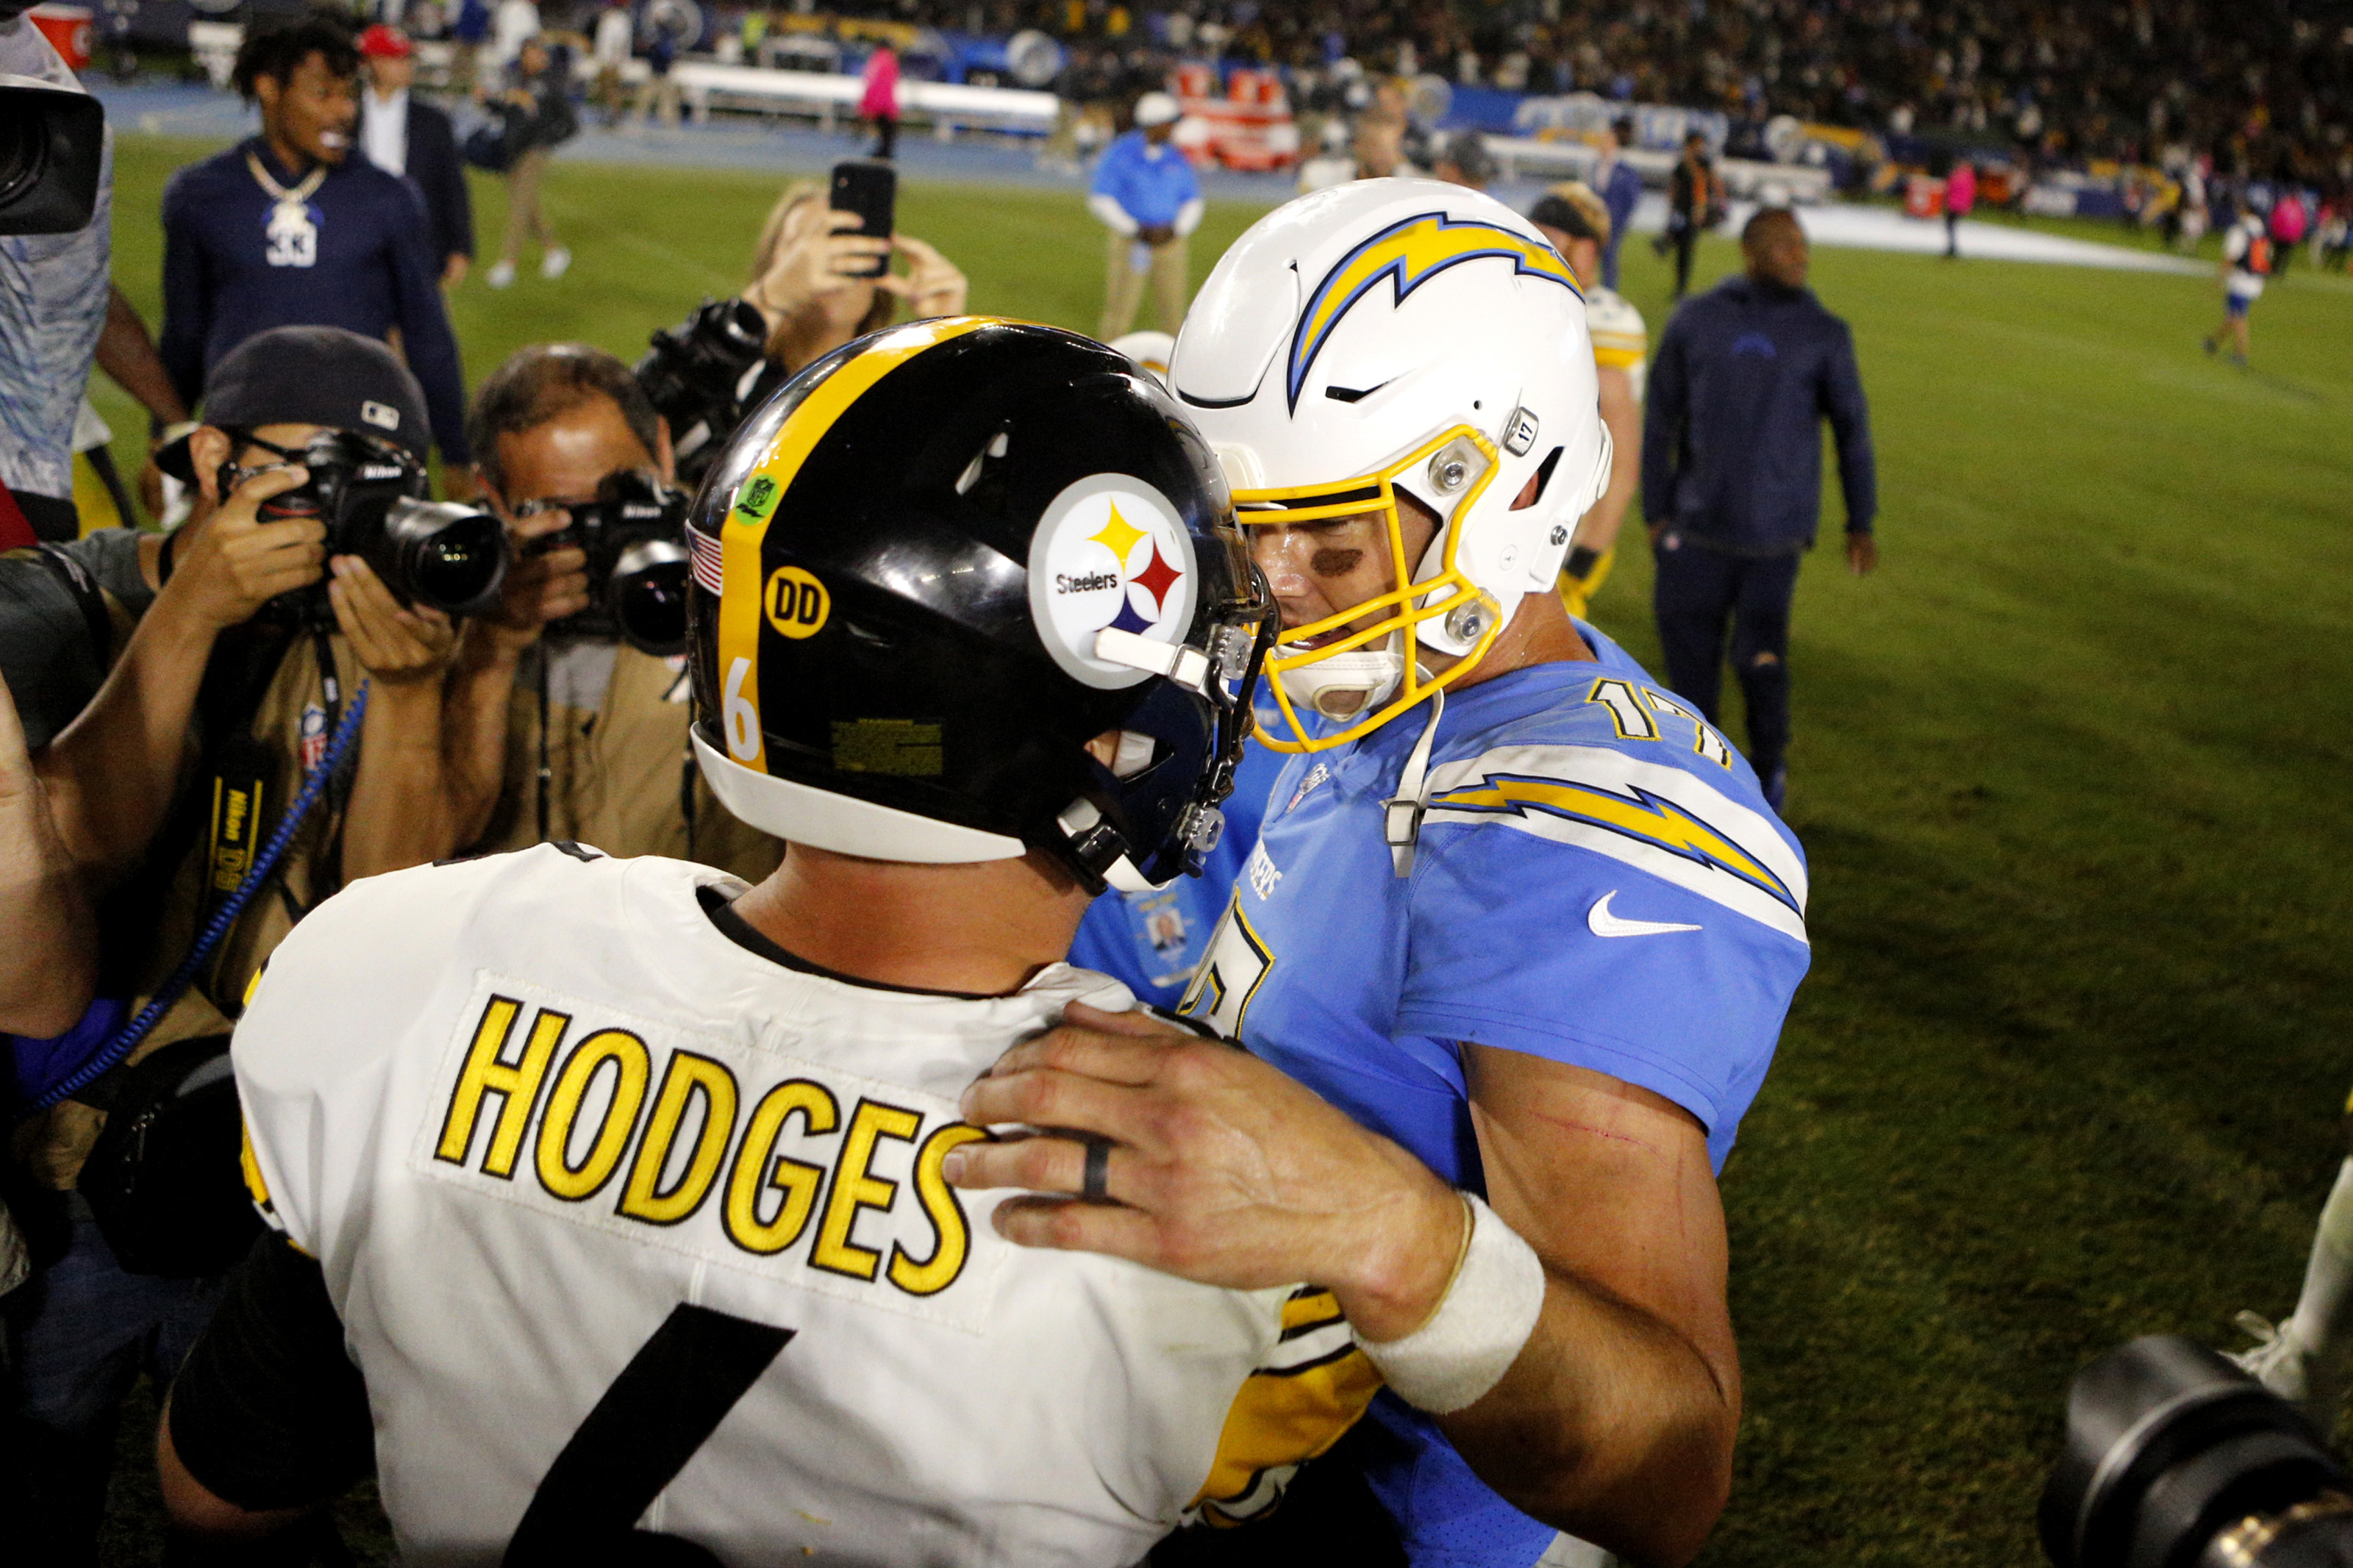 Pittsburgh Steelers: Studs and duds vs. Chargers in Week 6